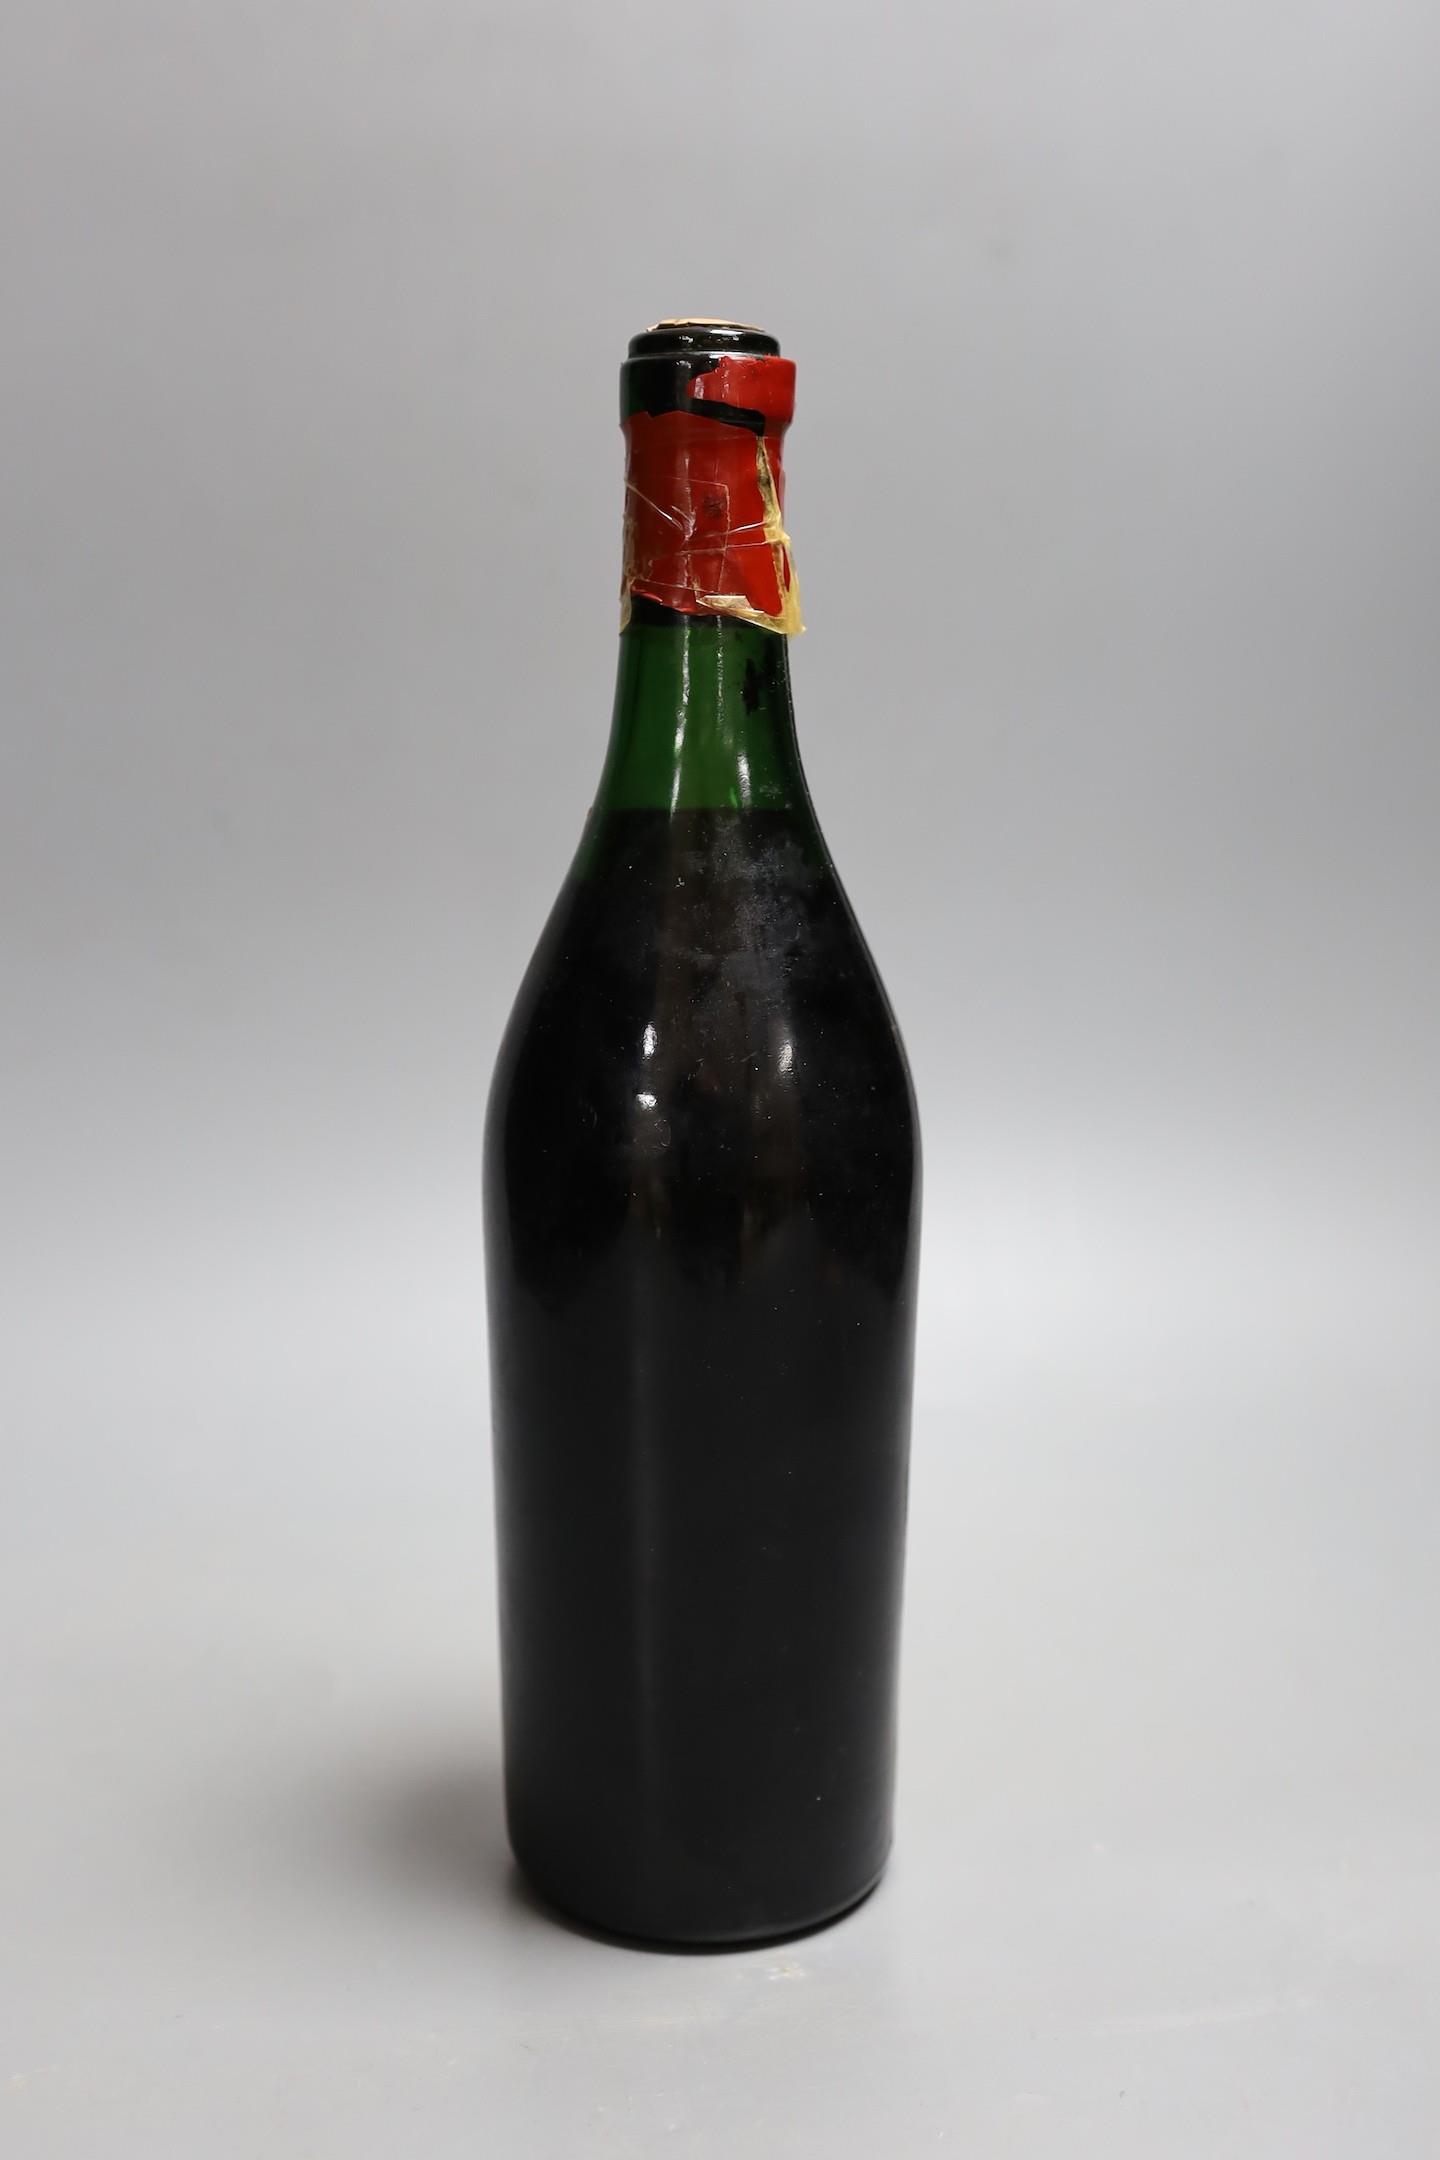 A bottle of Vosne Romanee Les Malconsorts 1959 - Image 2 of 2